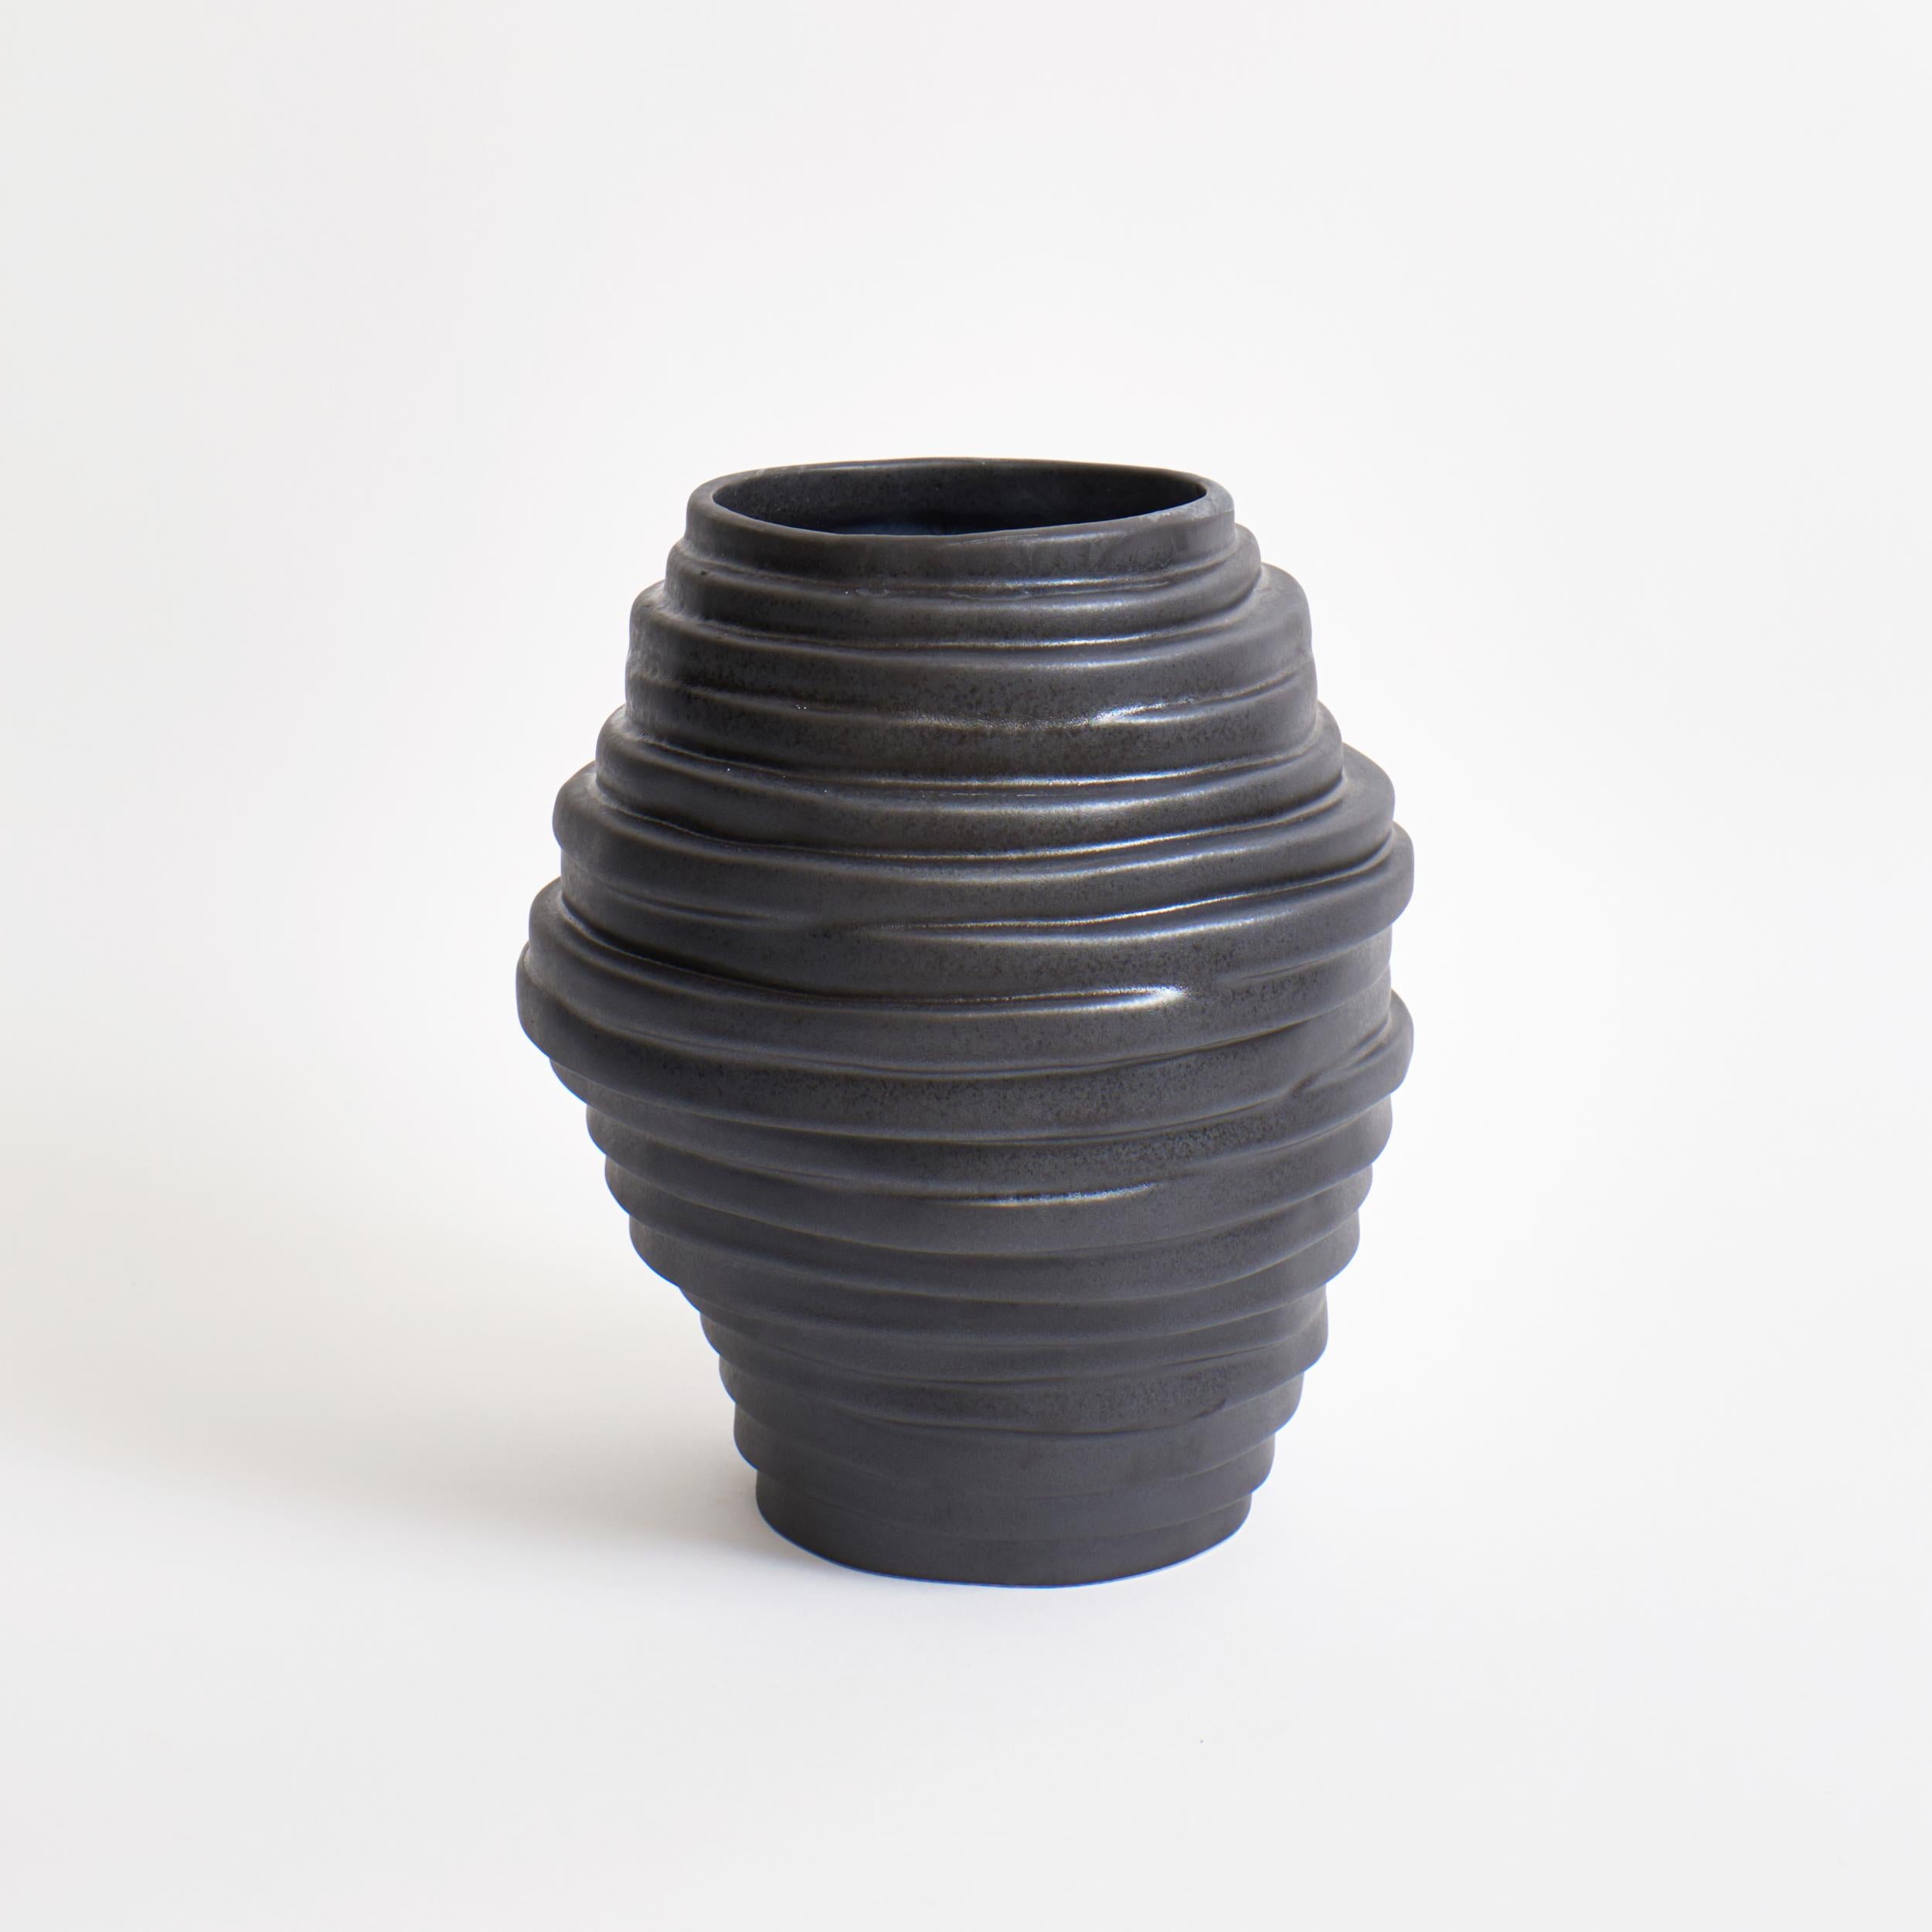 This vase draws inspiration from the Icelandic volcanic rock formations which can be found by Reynisfjara Black Sand Beach. It his sculpted by organically displacing seventeen individual layers. 

This glaze is in matt graphite coloured finish